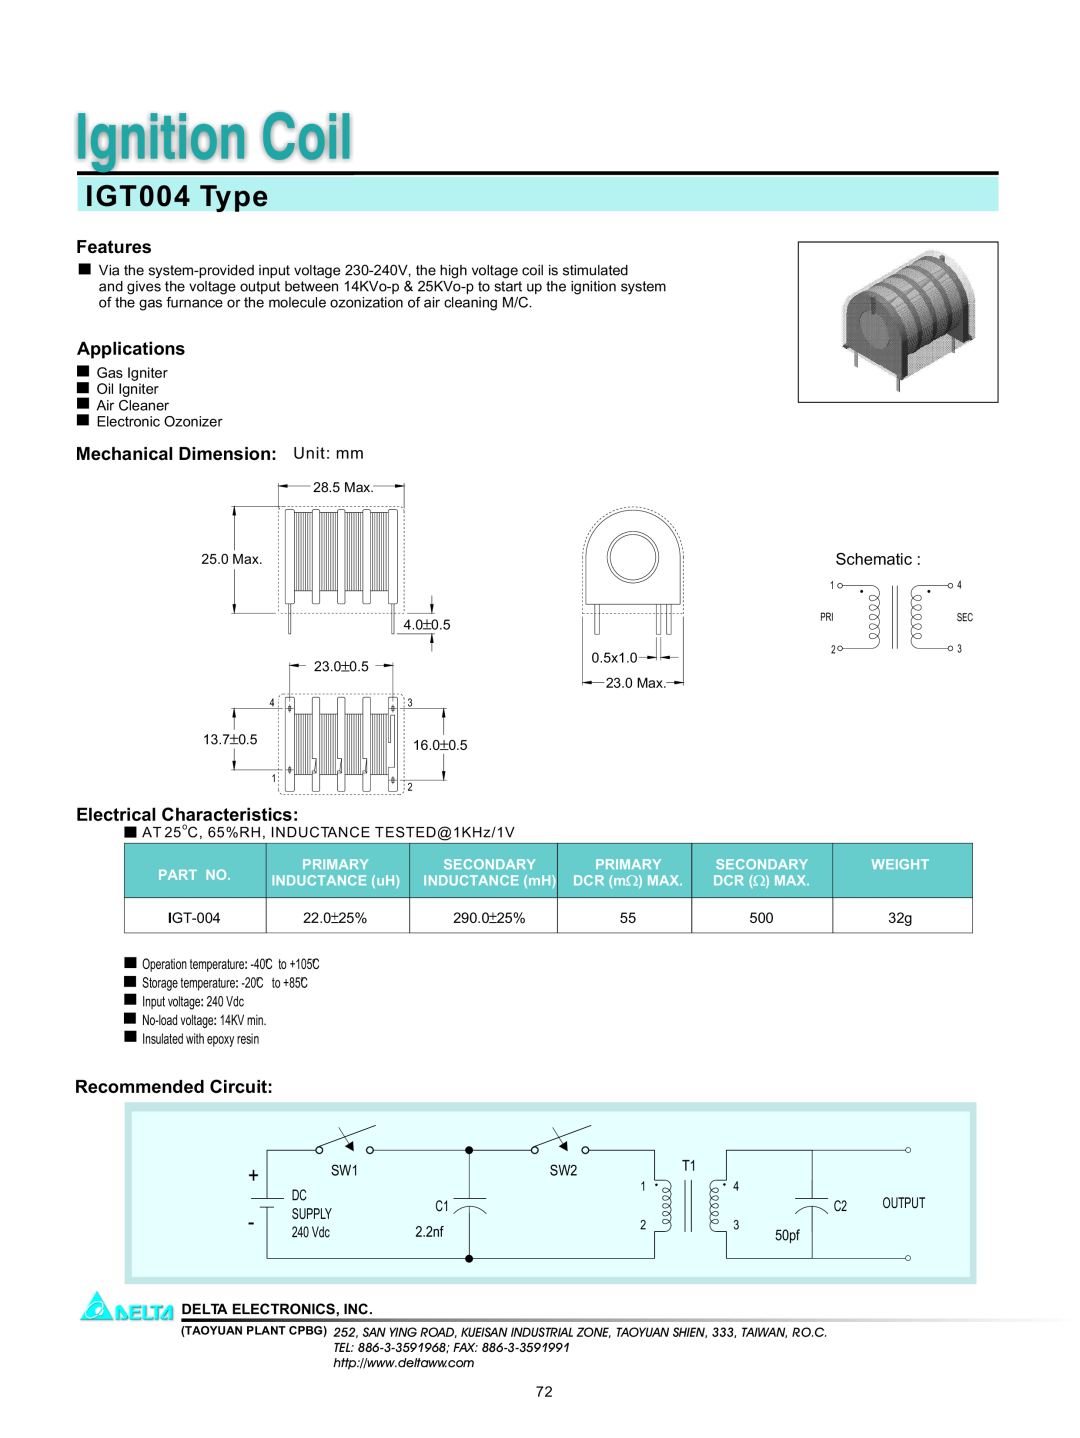 Delta Electronics manual Ignition Coil, IGT004 Type, Features, Applications, Mechanical Dimension Unit mm, Schematic 